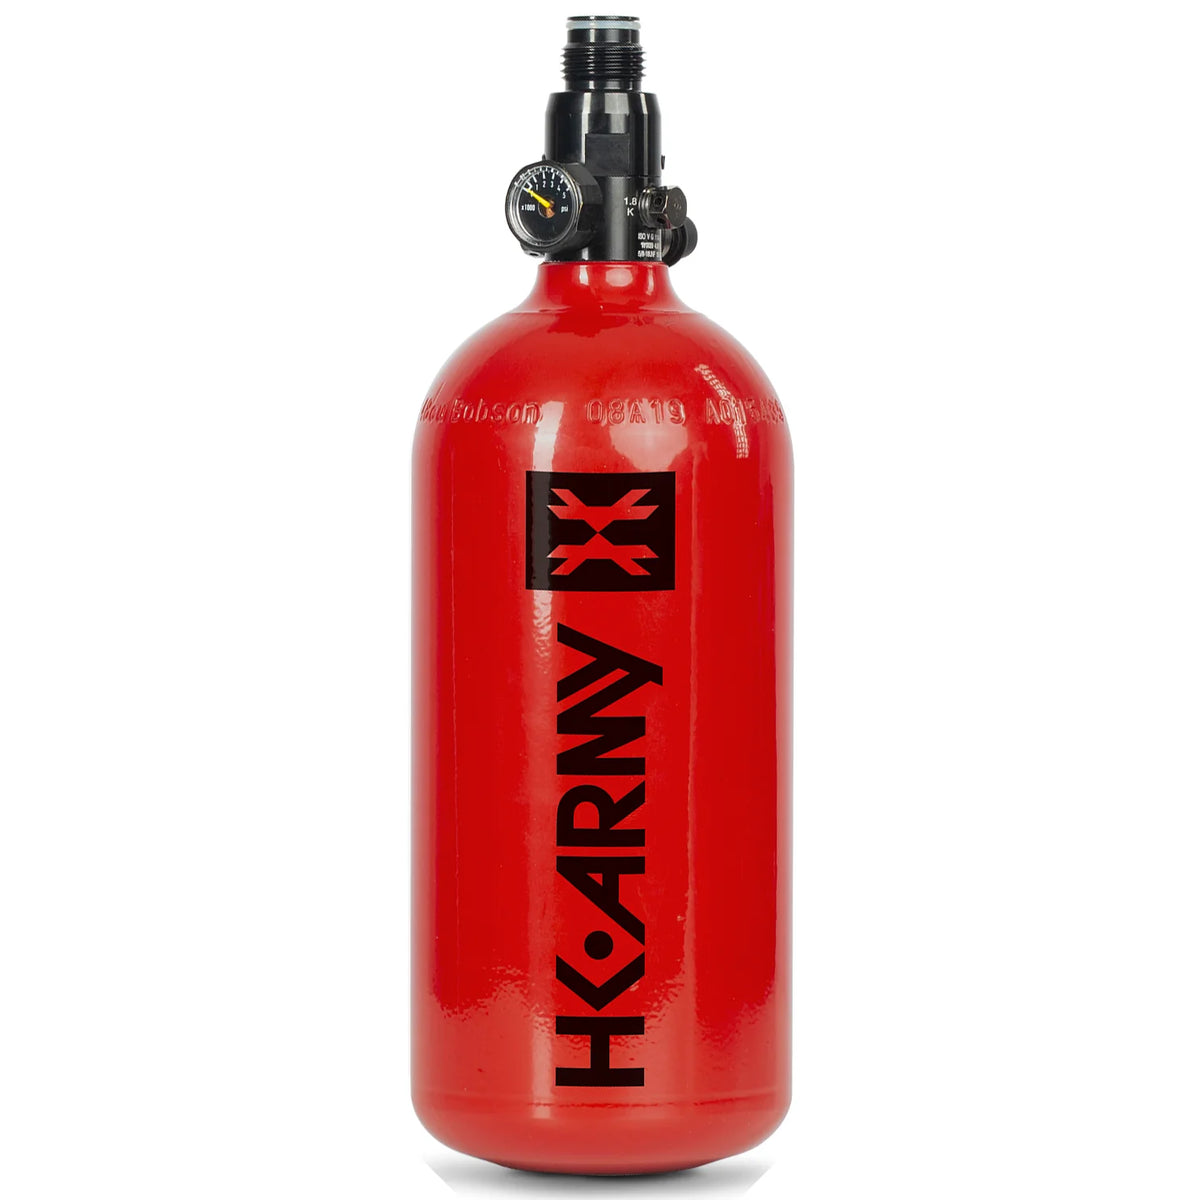 48ci / 3000psi -  Paintball Compressed Air Tank - Red | HK Army